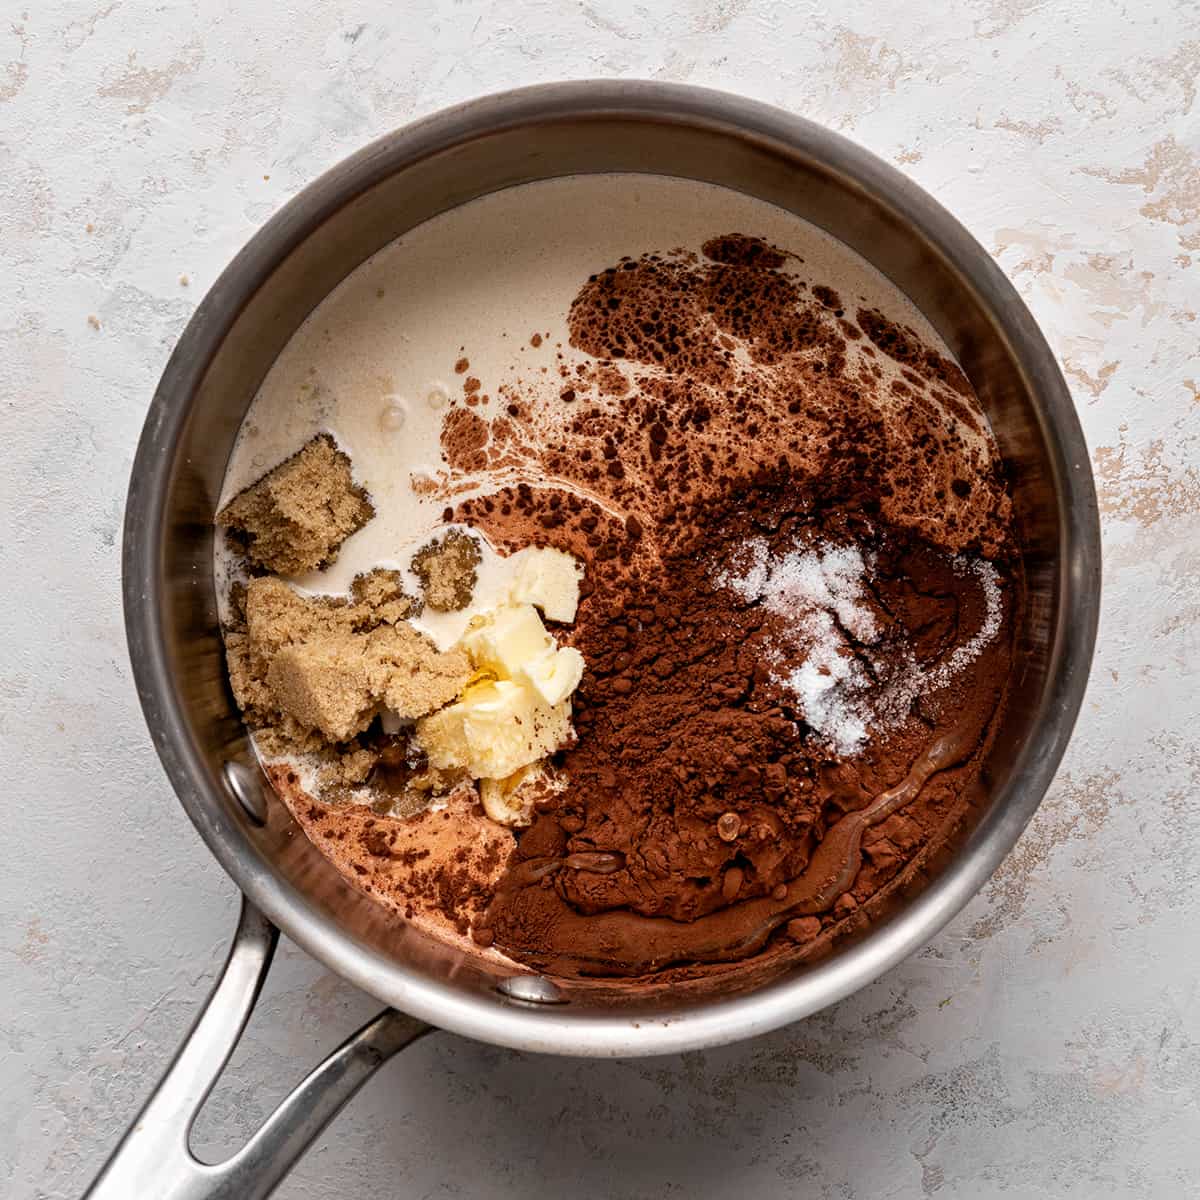 How to Make Chocolate Sauce - ingredients in a saucepan